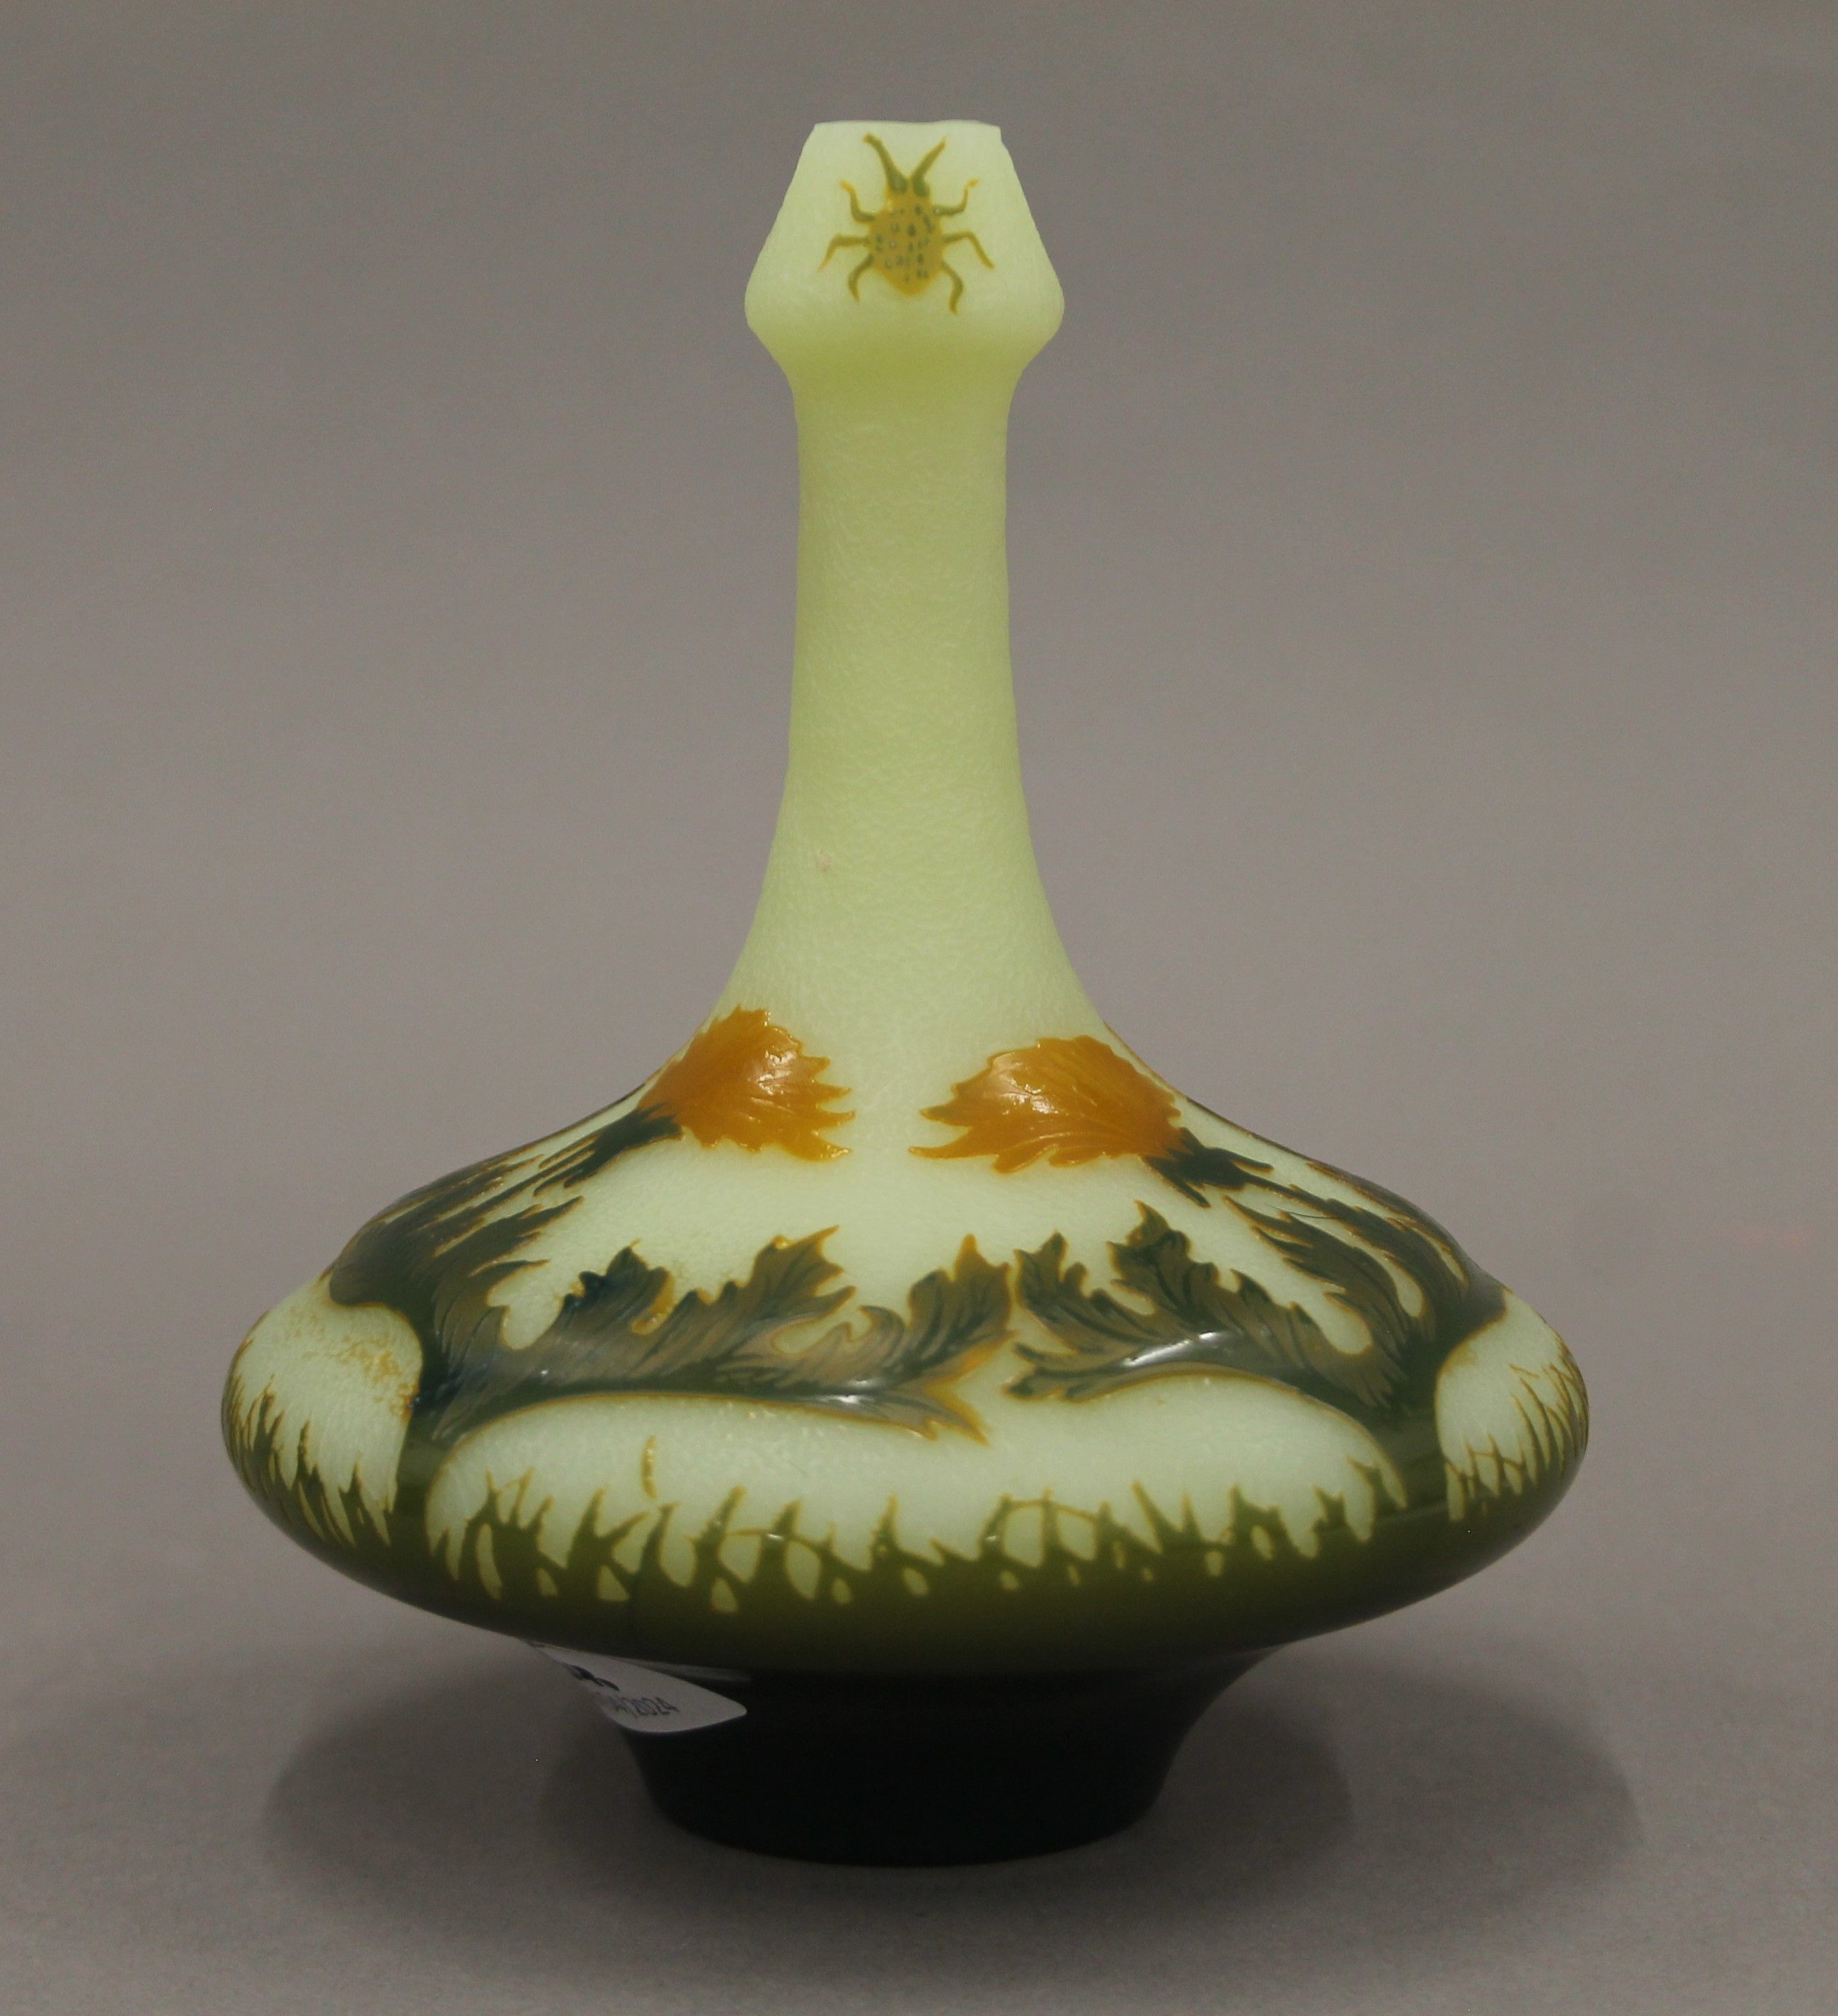 A French acid-etched cameo glass vase of squat shape, the bottle neck decorated with two beetles, - Image 2 of 6